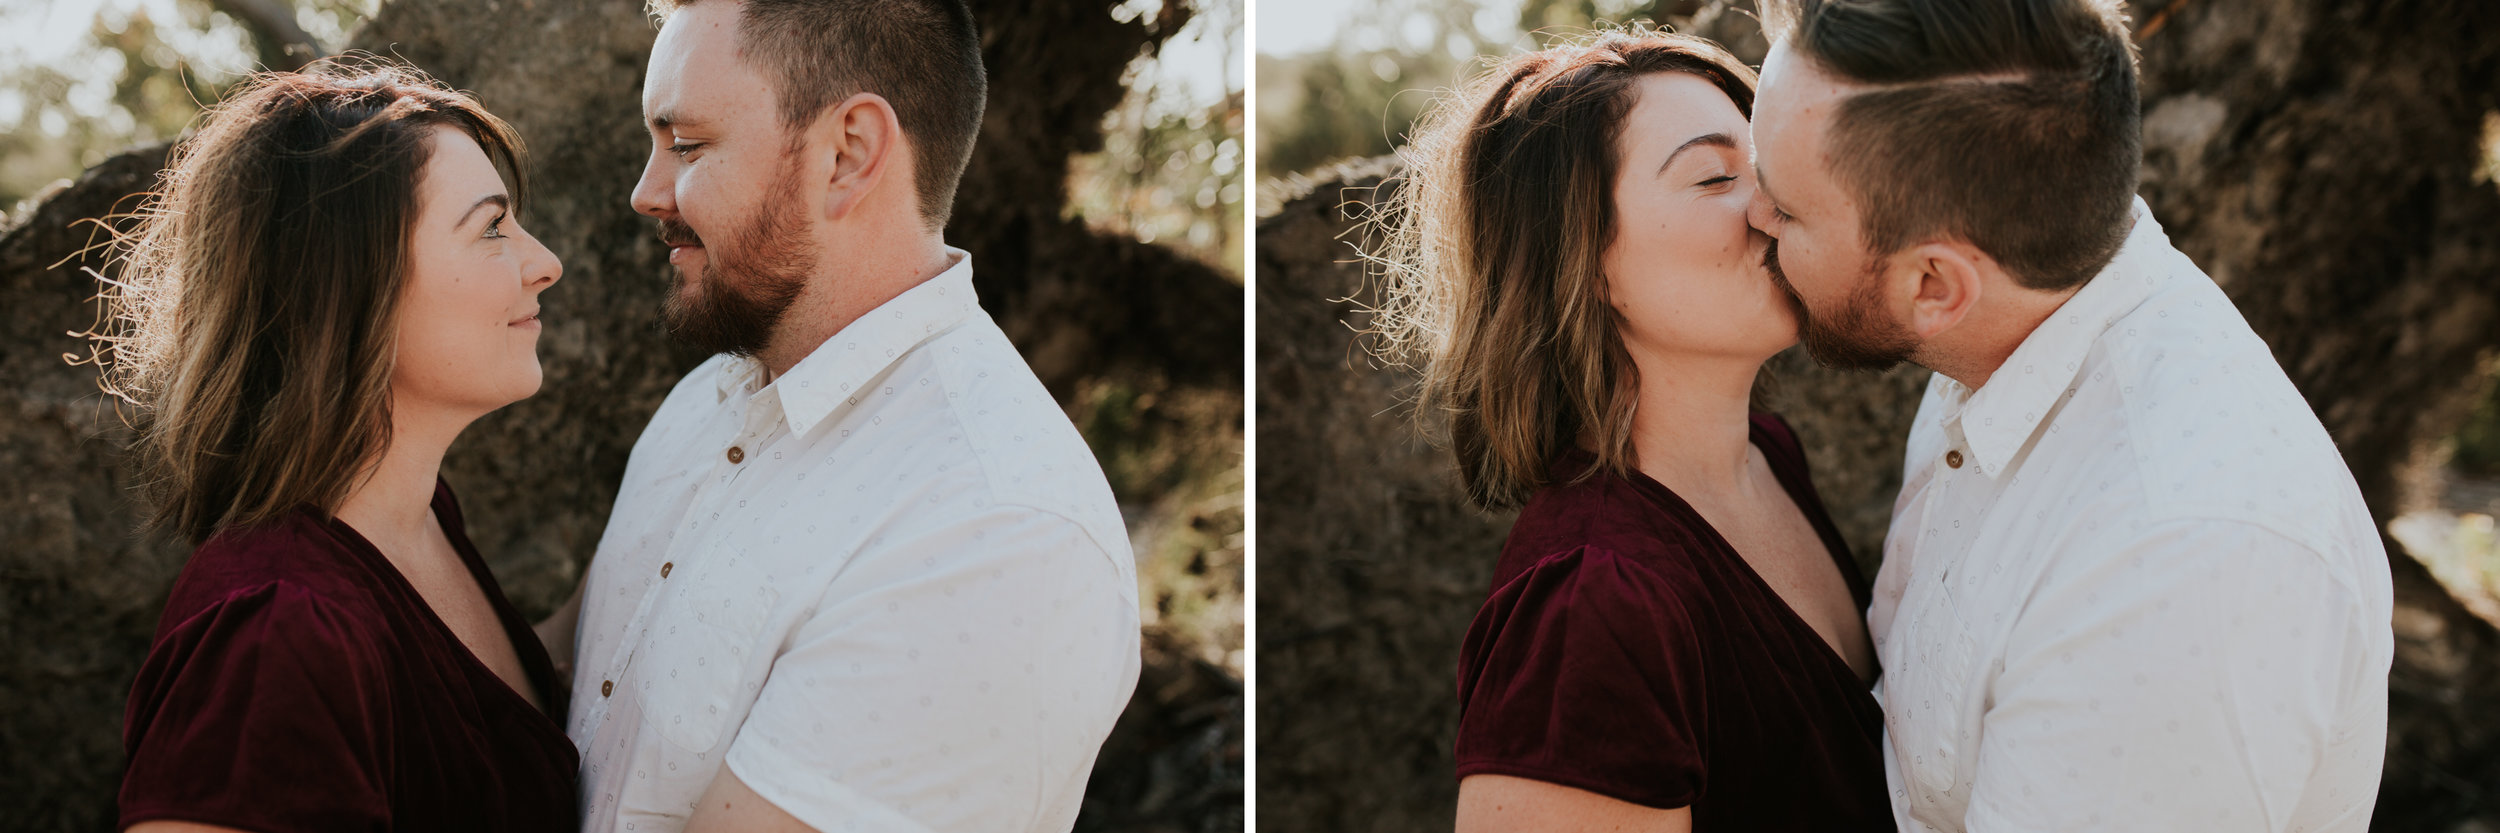 Sarah+Grant+Anniversary+Couple+session+Southern+highlands-4.jpg